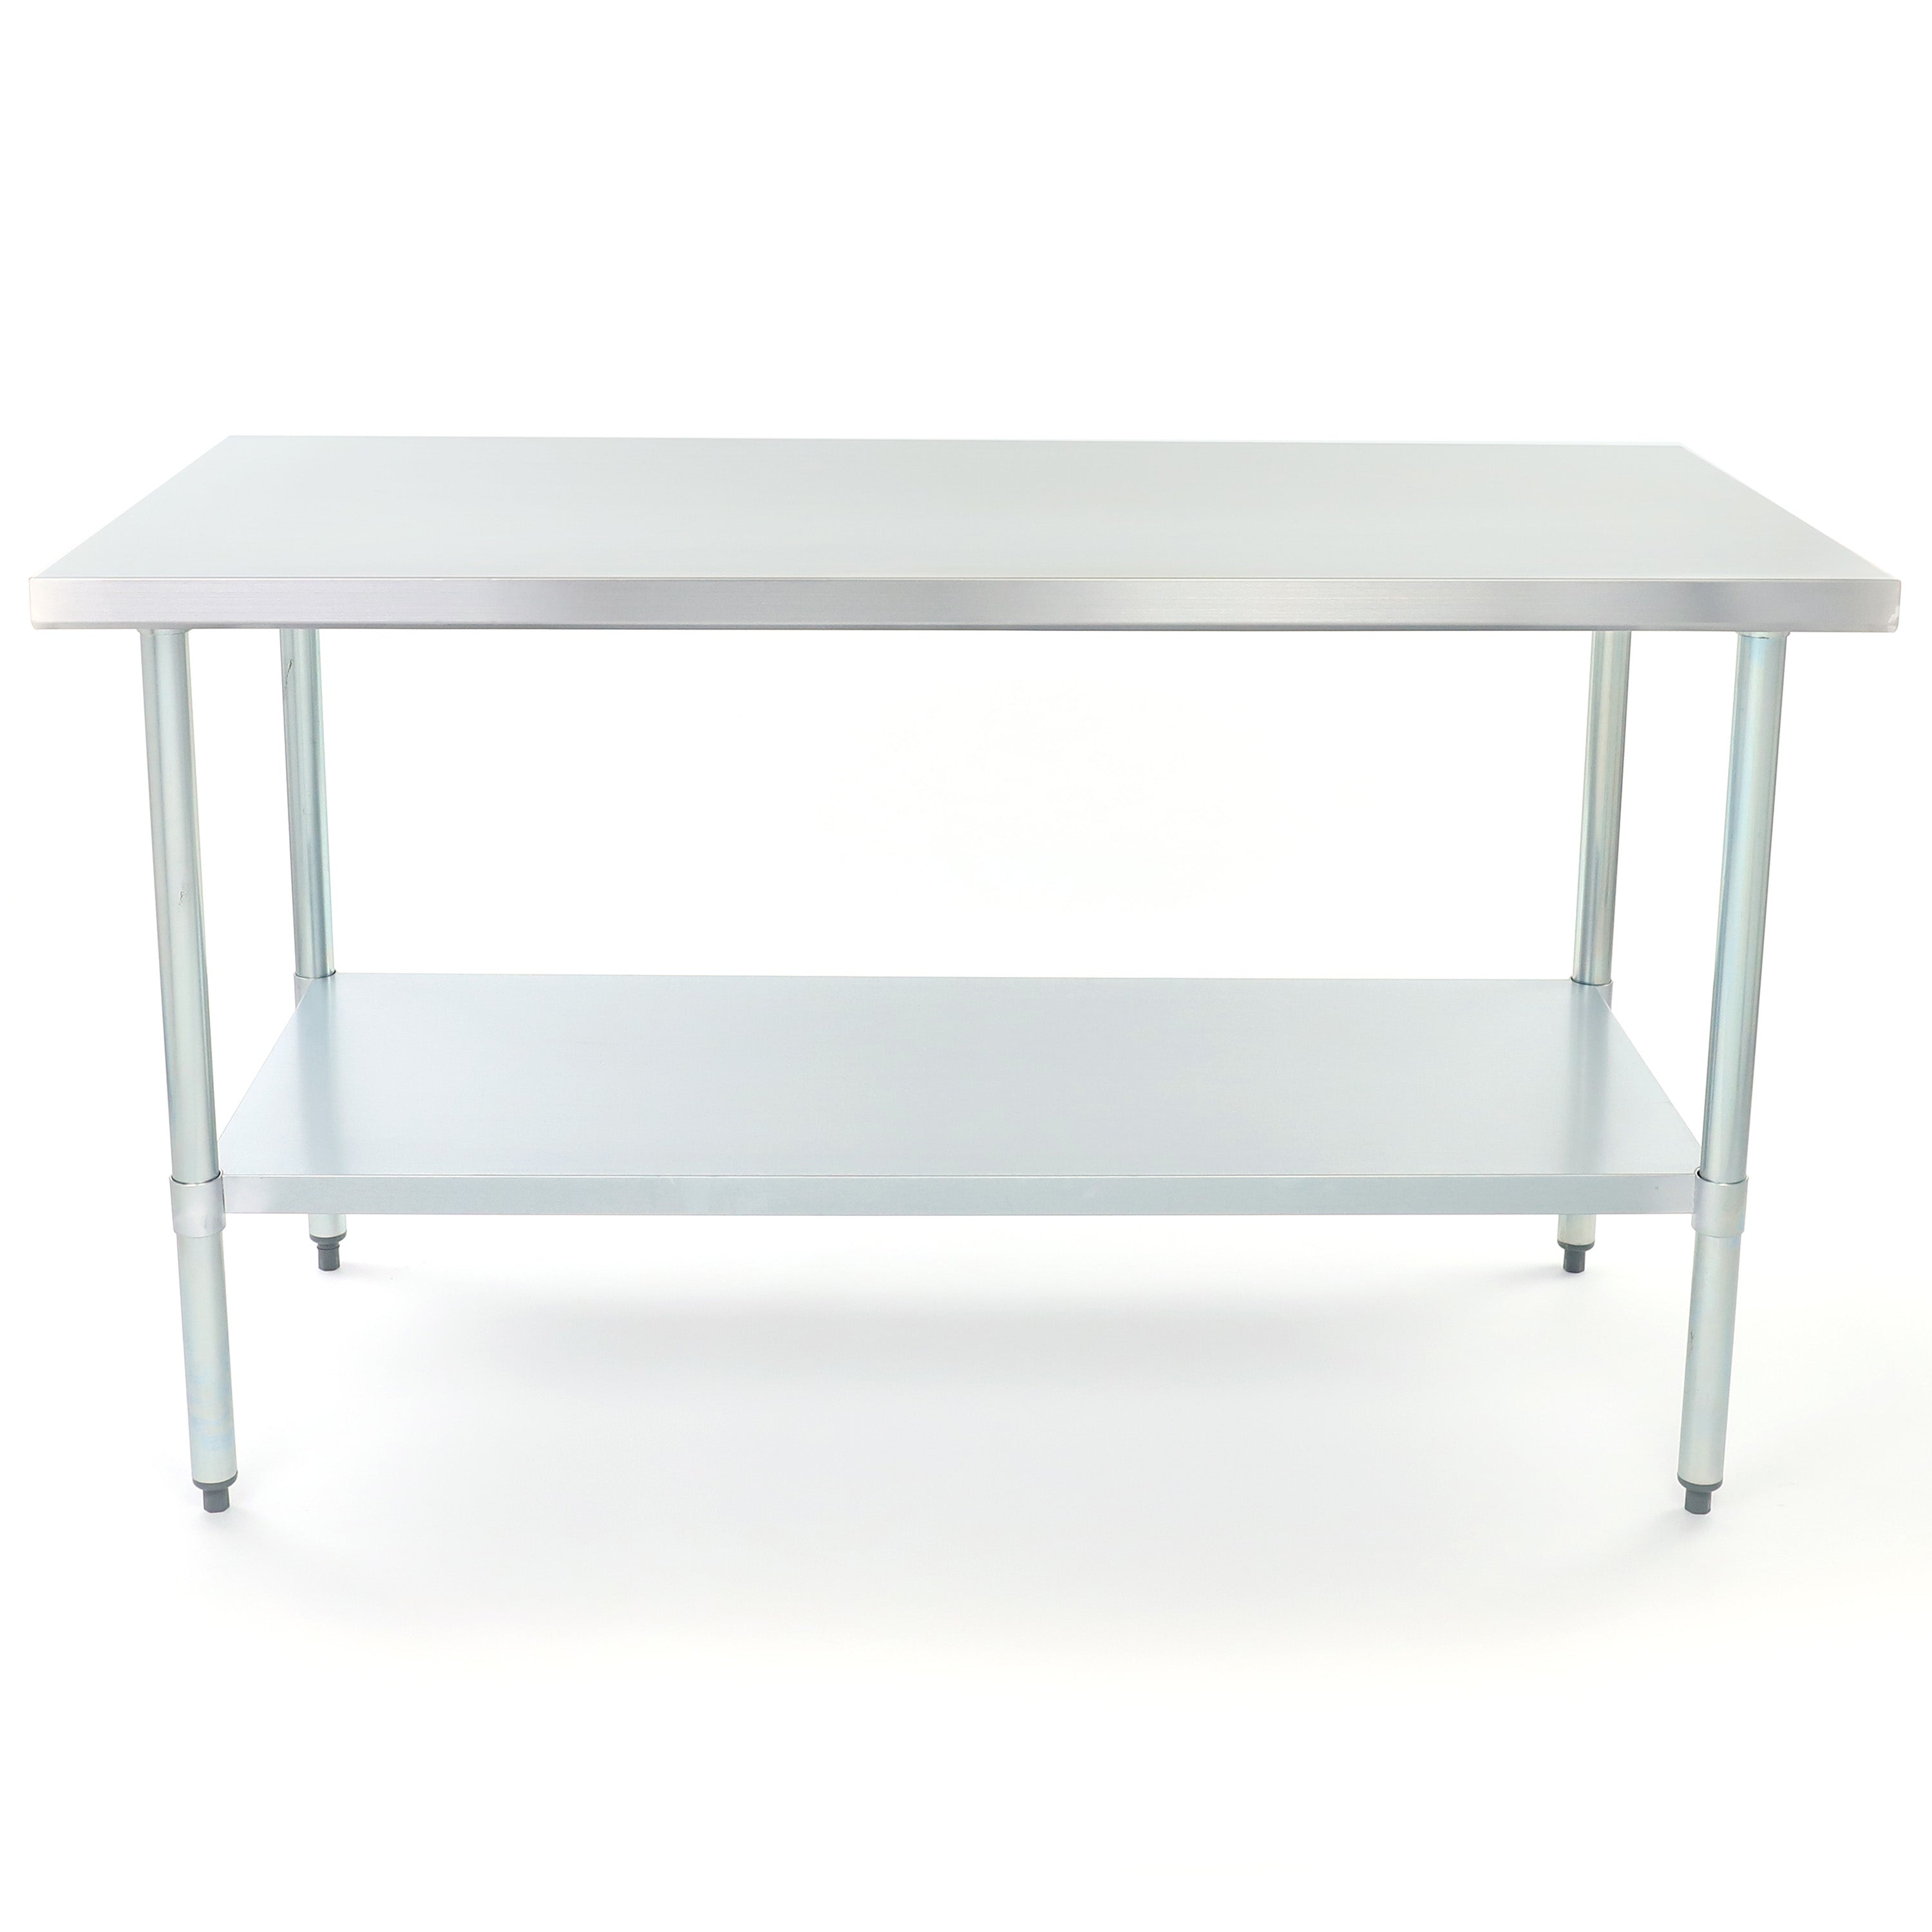 Adcraft WT-3048-E Work Table, Stainless Steel Top